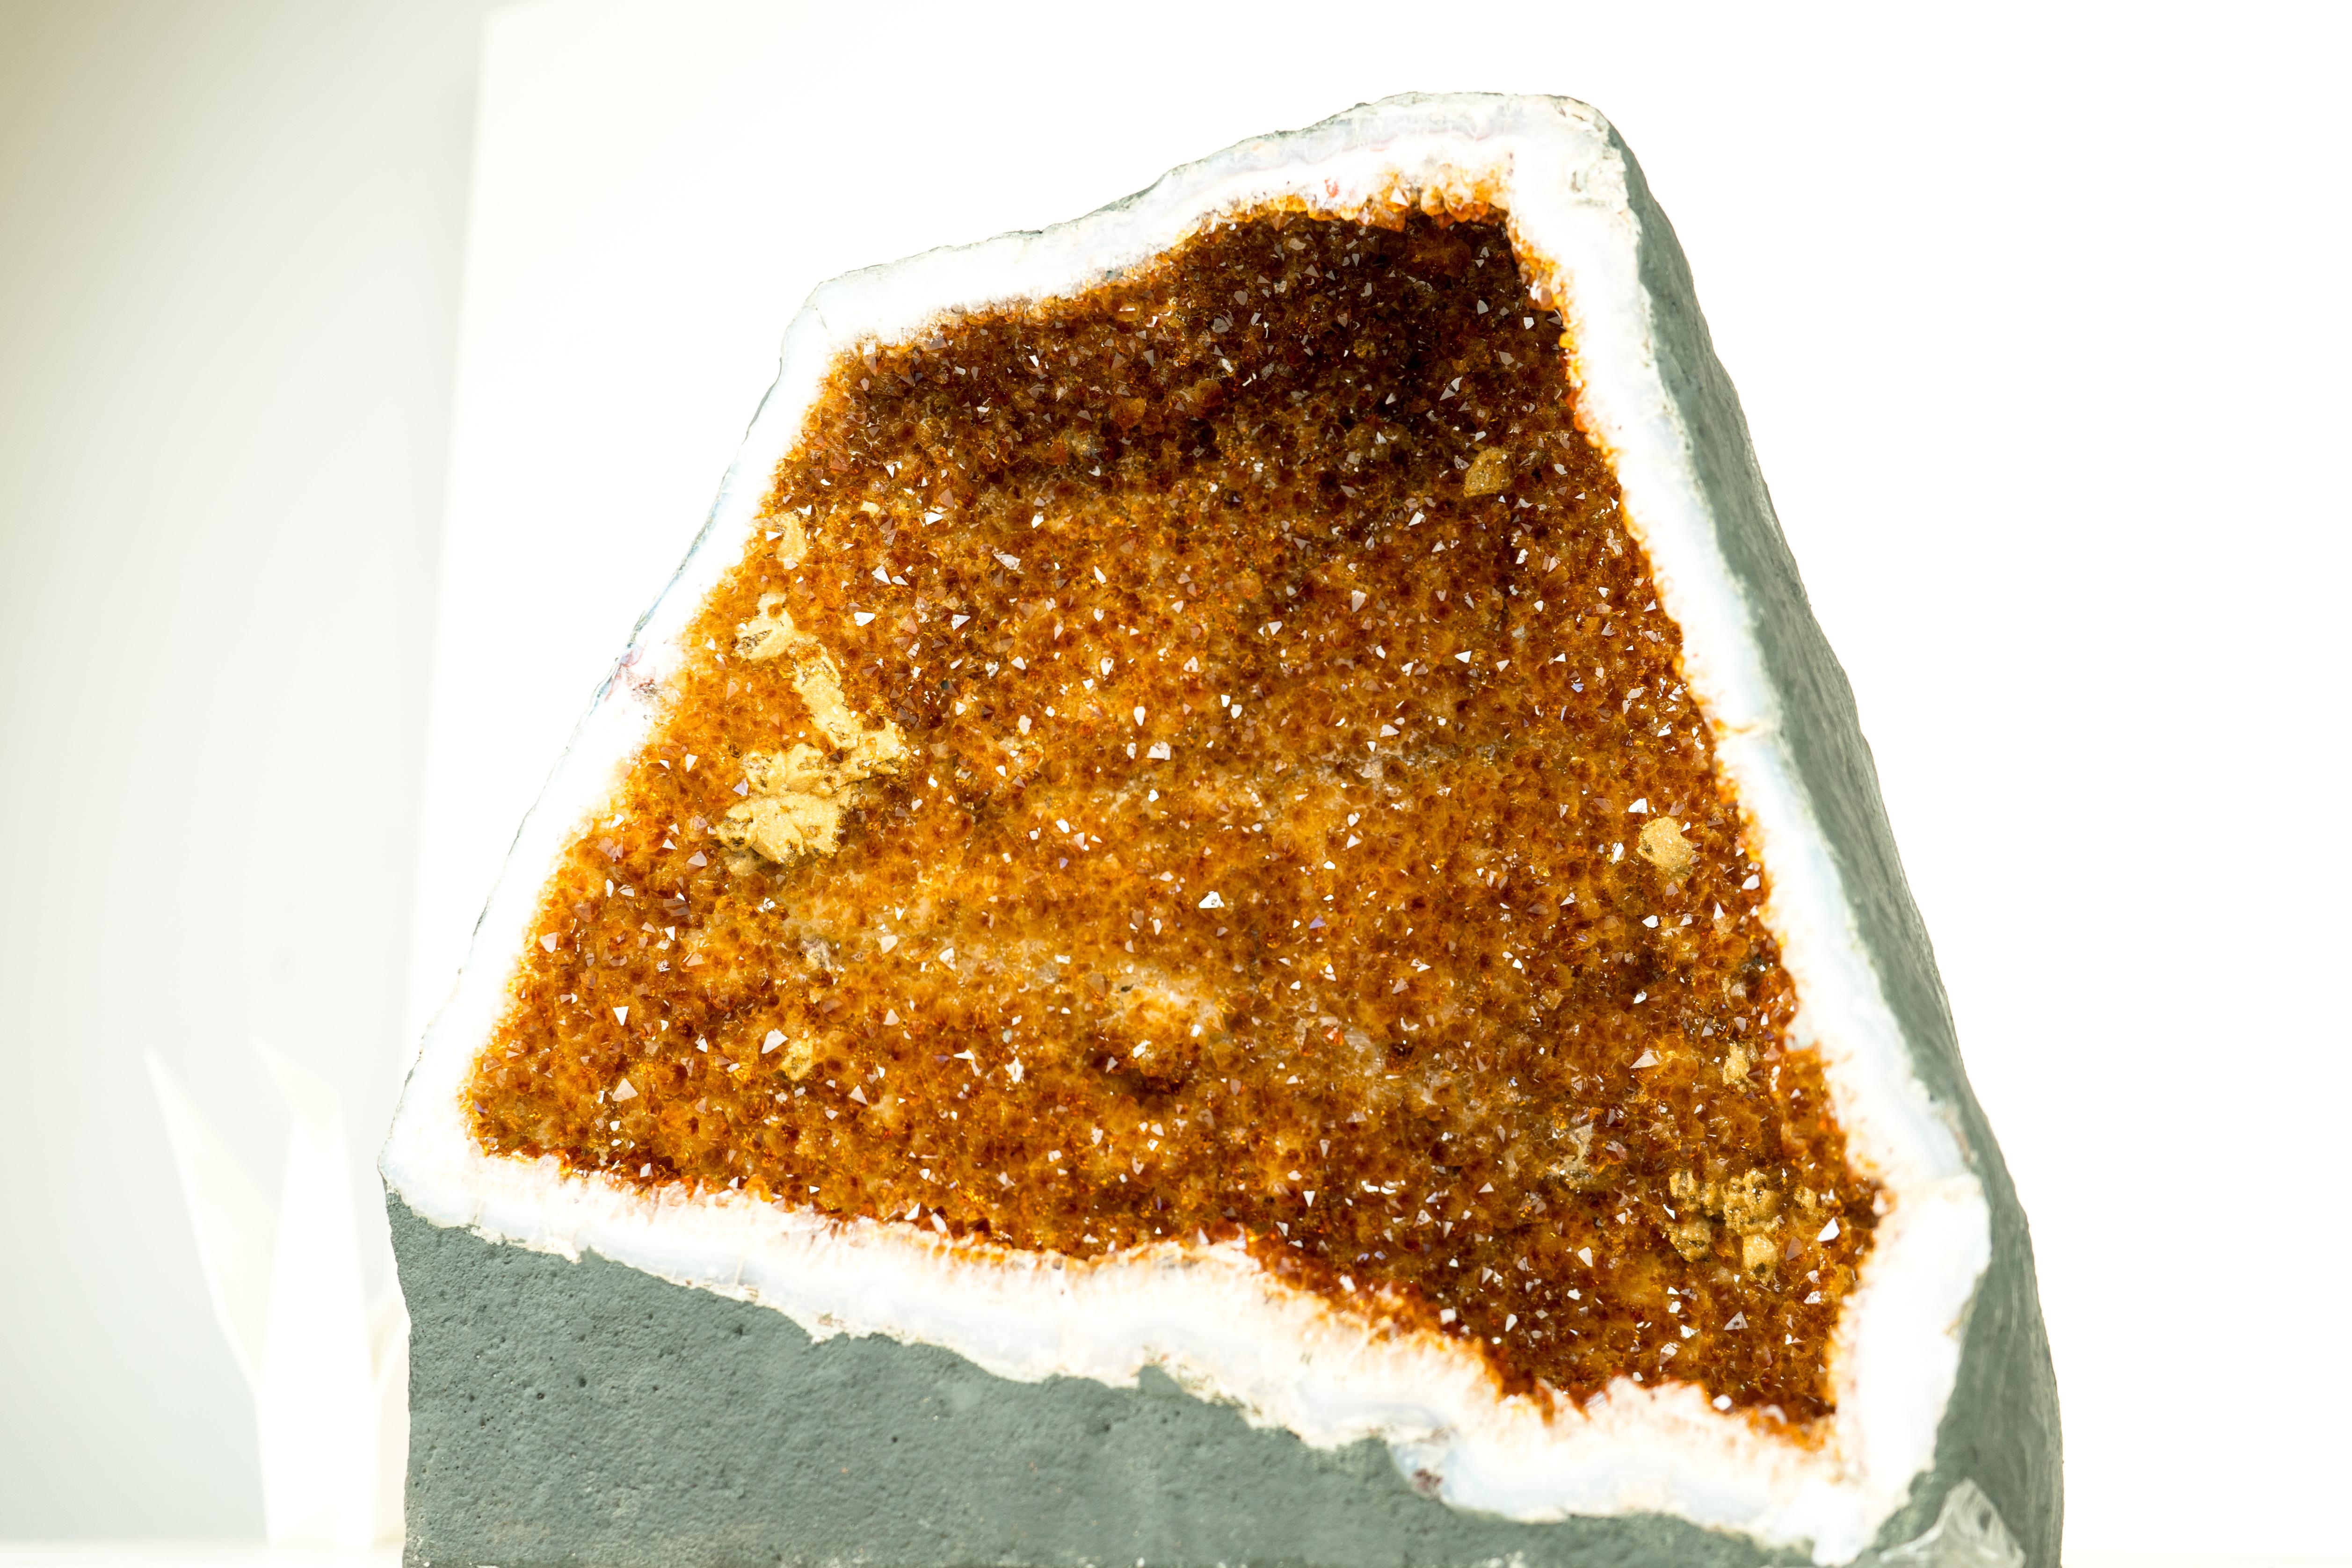 Brazilian High-Grade Citrine Geode Cave - Saturated Orange Druzy Crystals and Stalactites For Sale